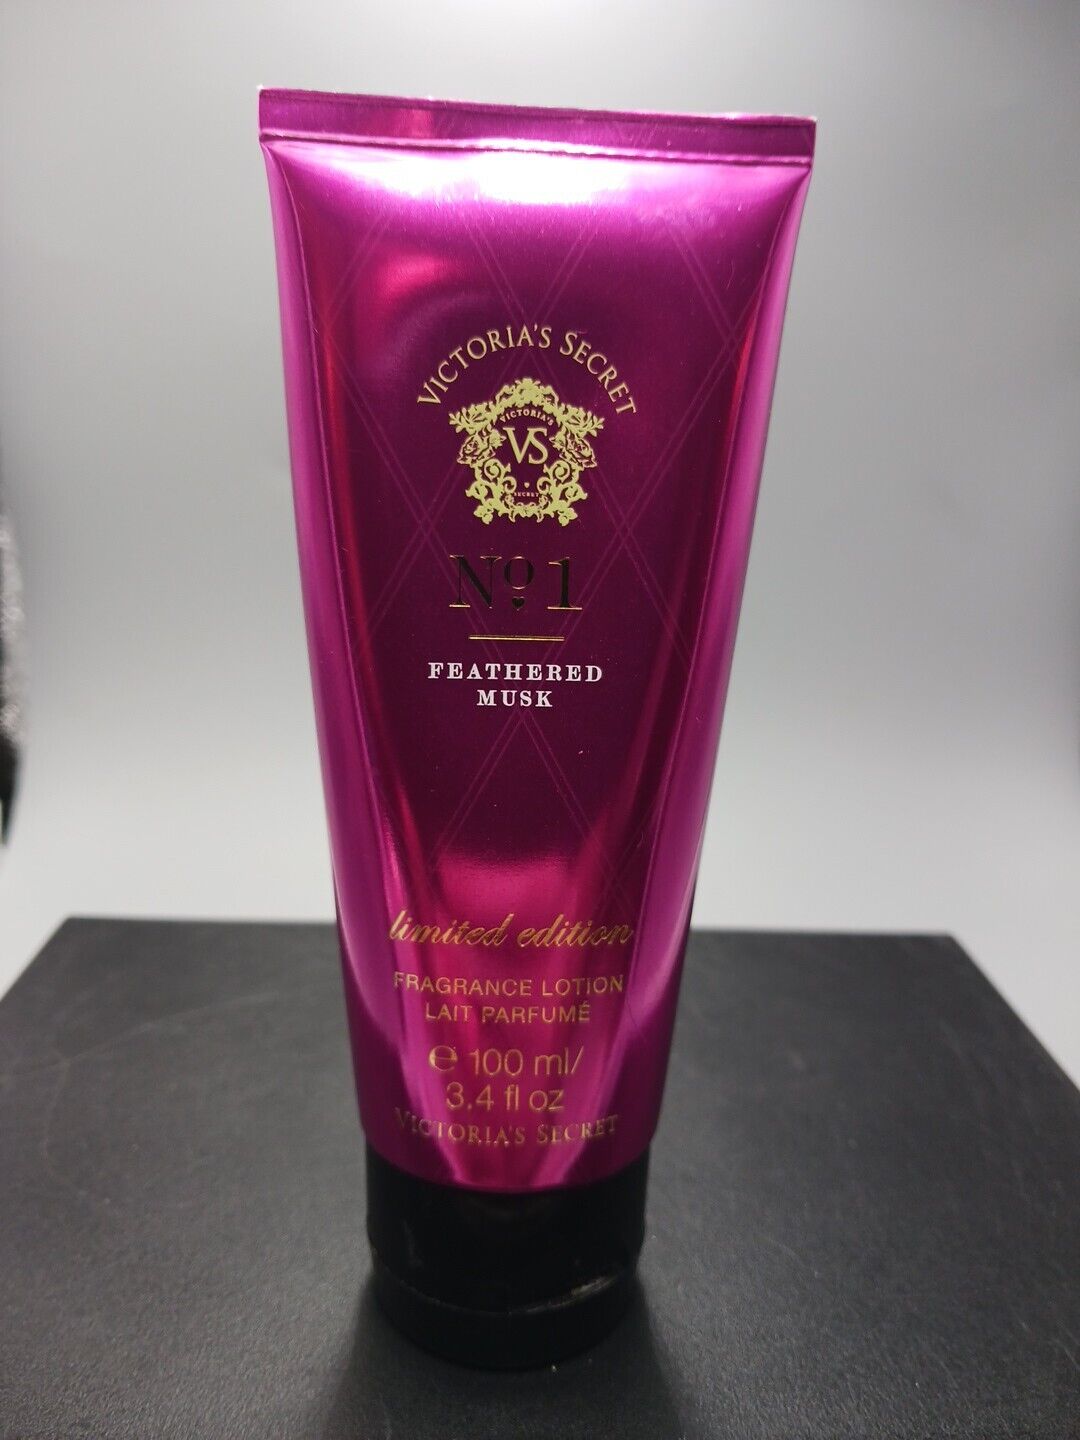 Victoria\'s Secret Limited Edition Feathered Musk Fragrance Lotion 3.4 Oz. Open